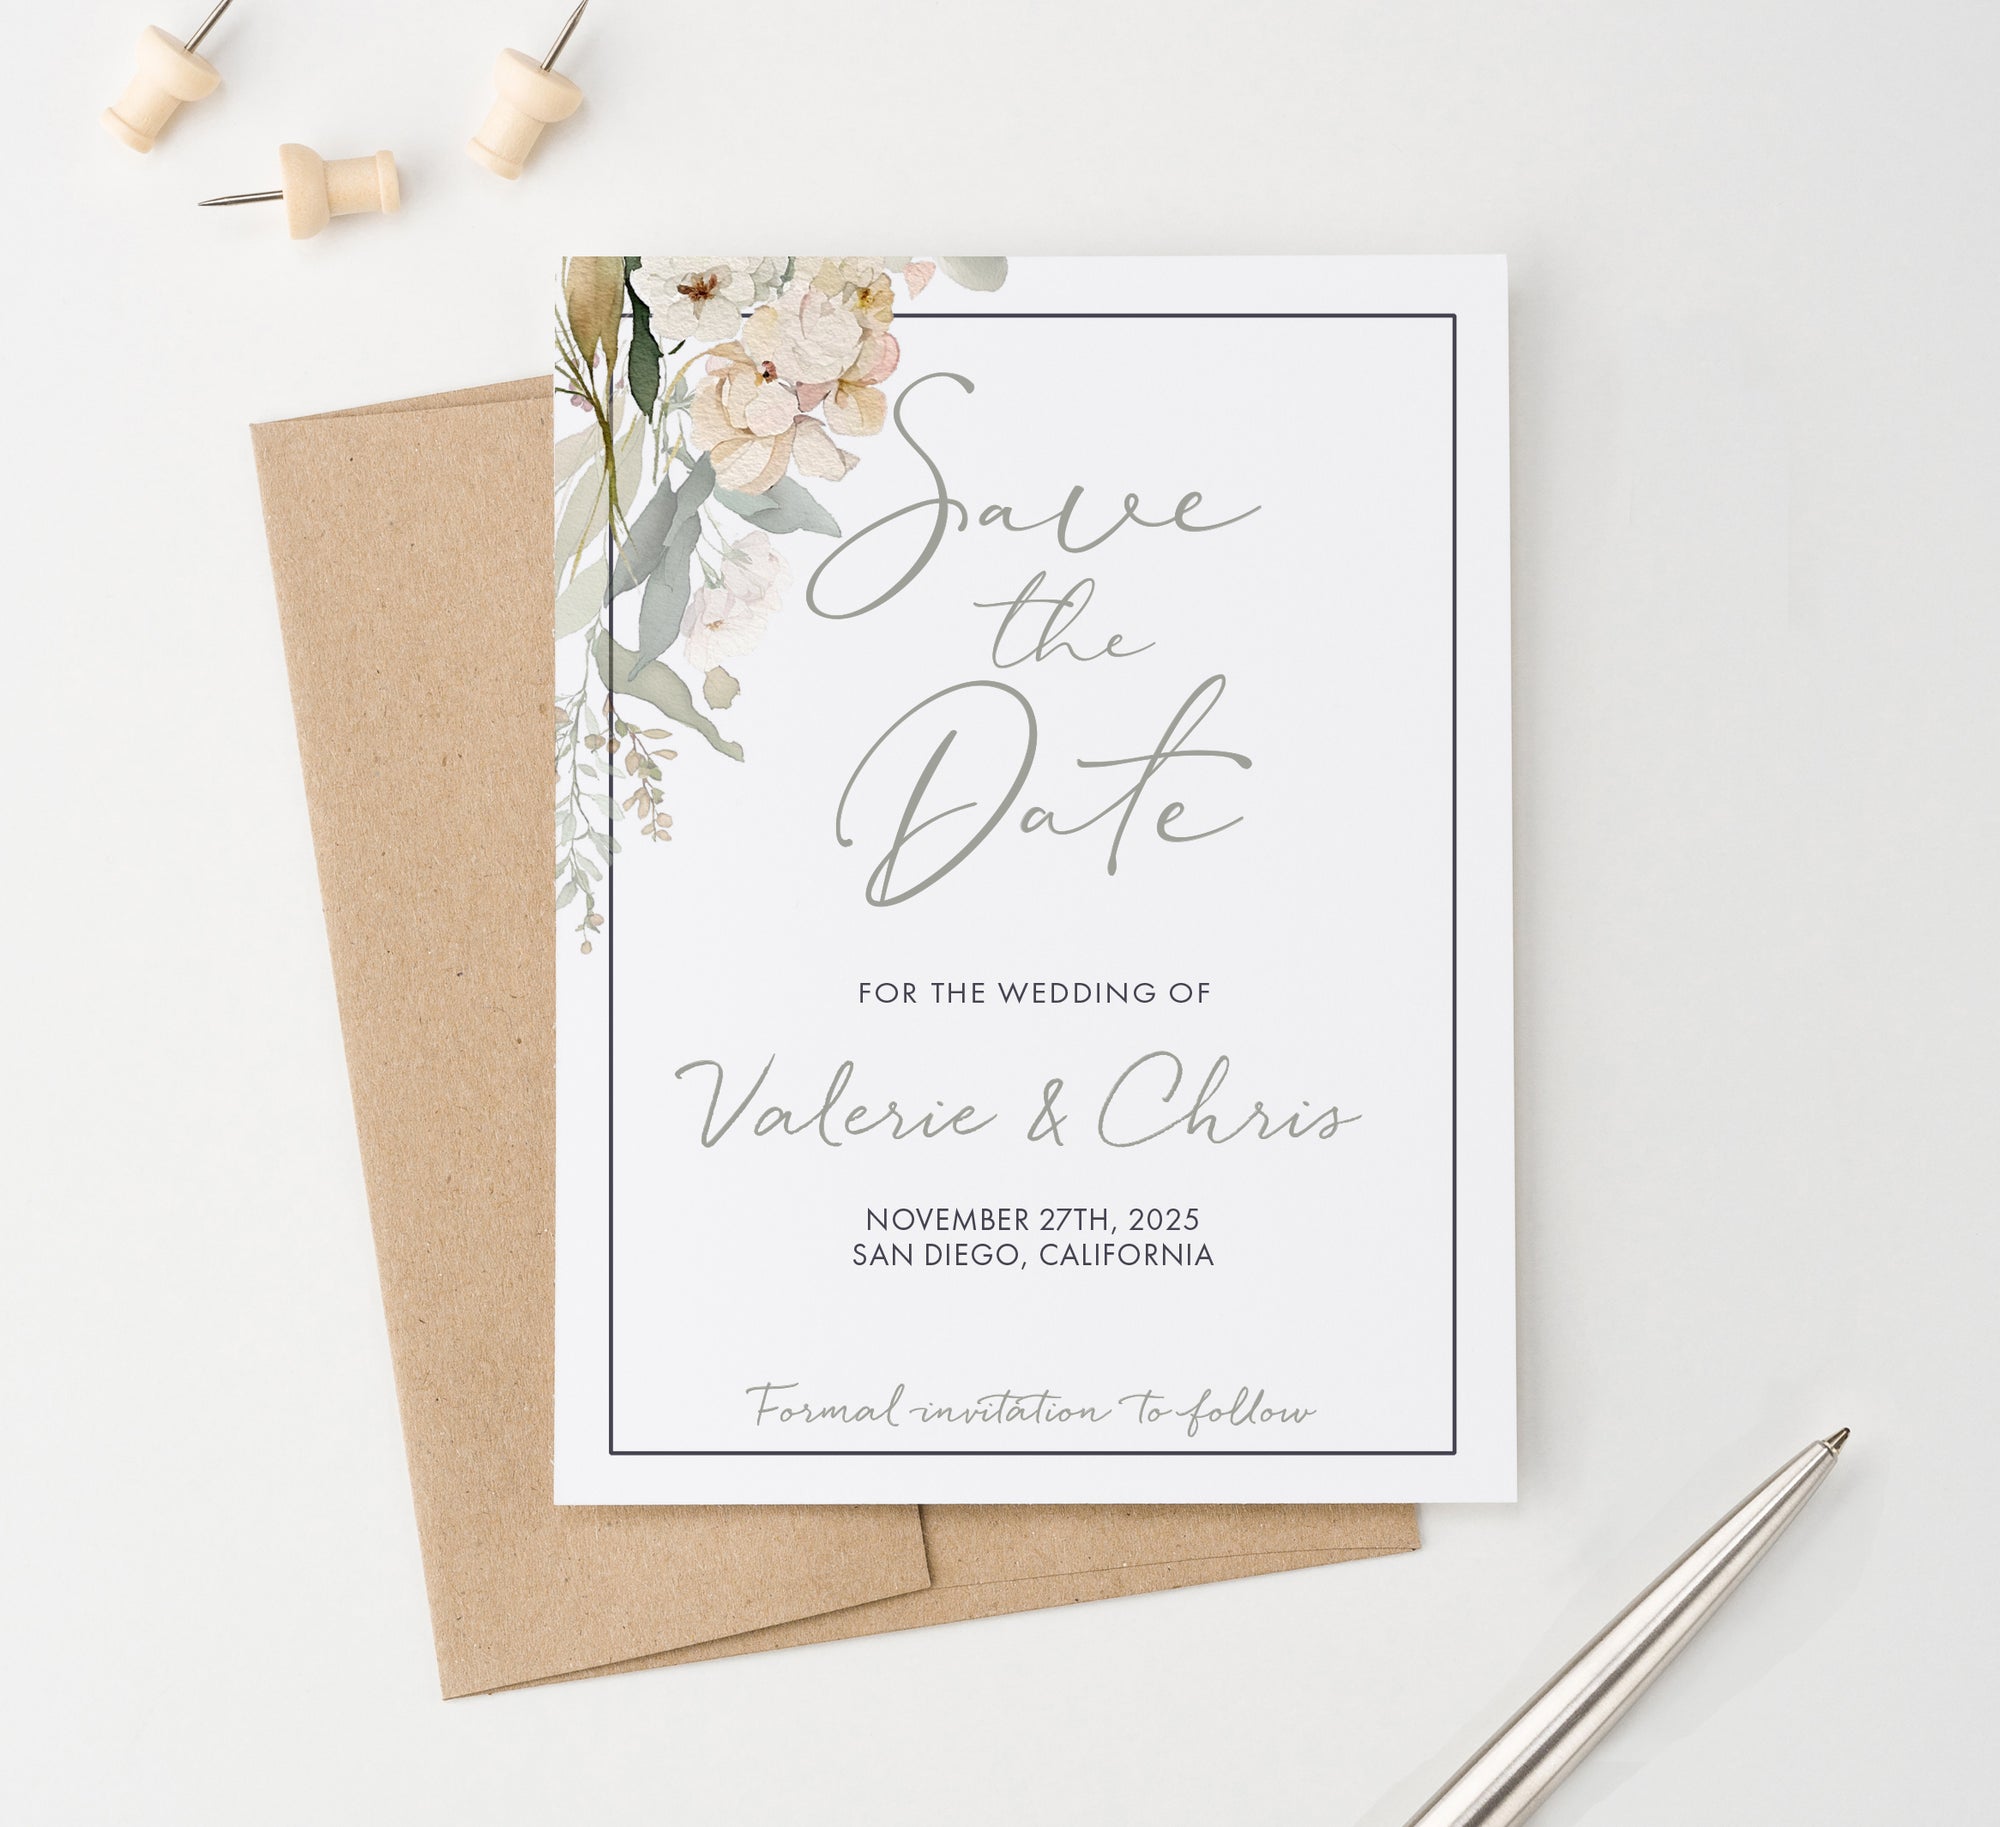 Elegant Save The Date With Watercolor Florals